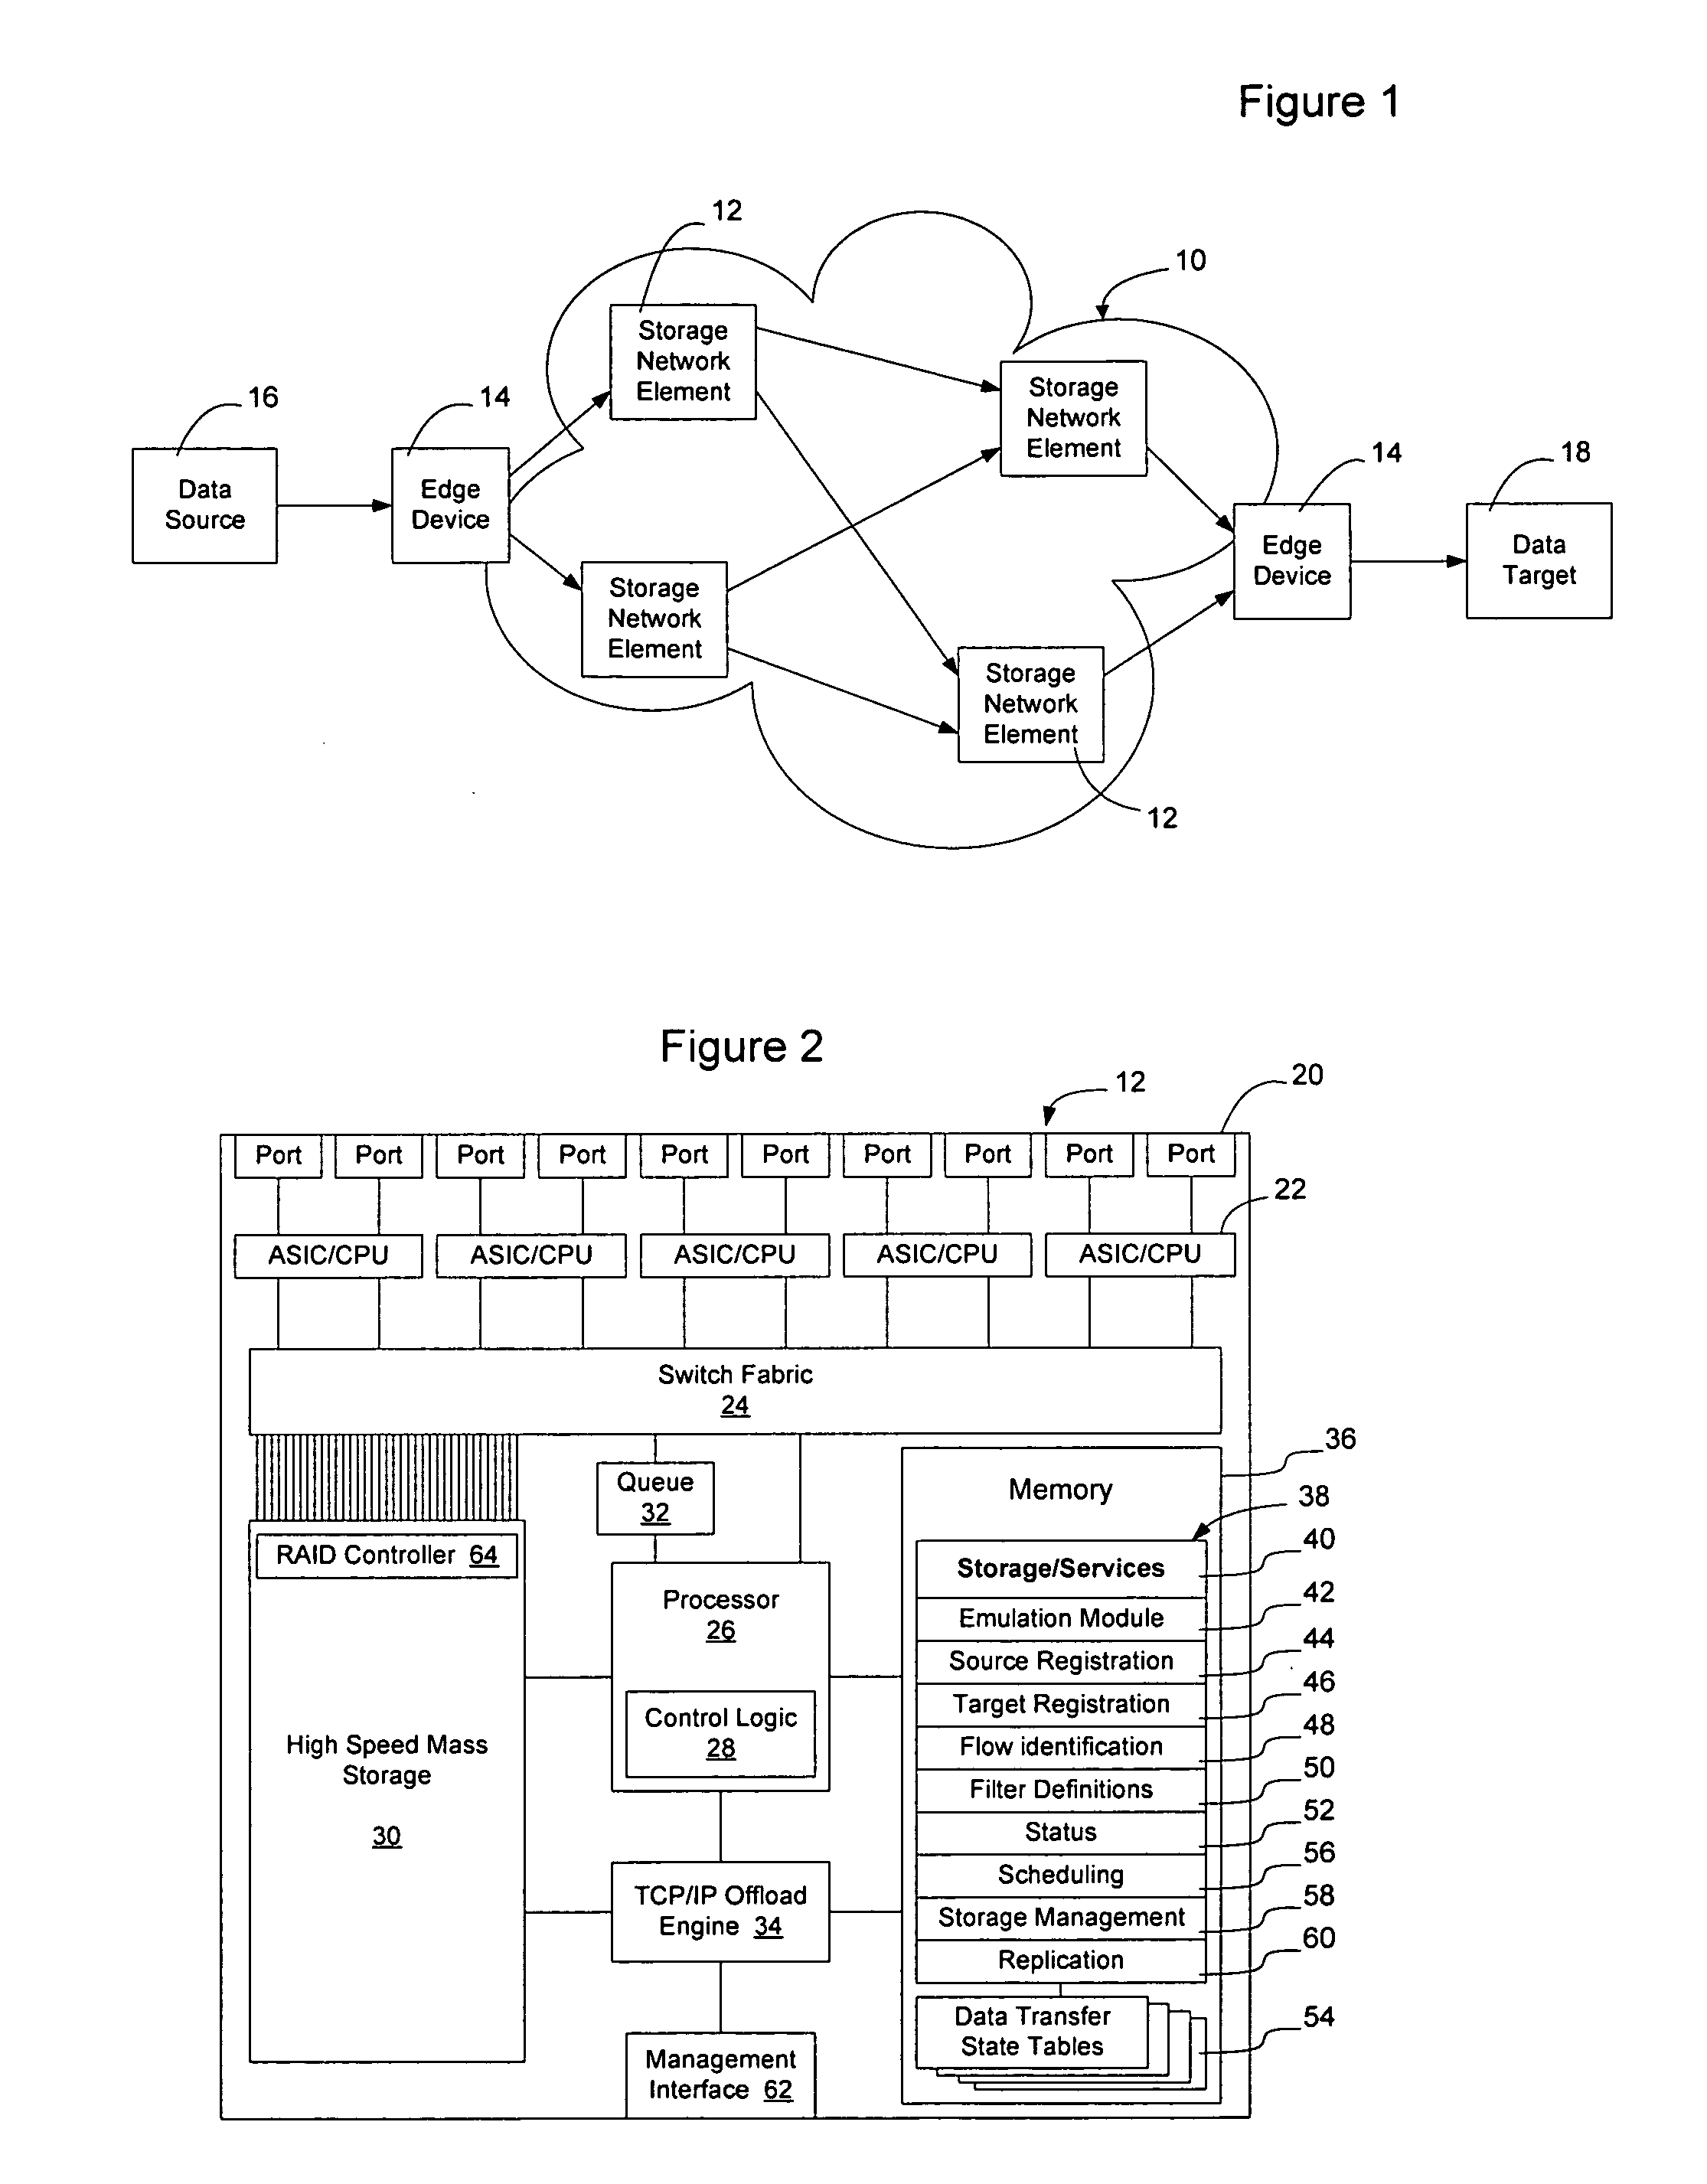 Method and apparatus for transporting parcels of data using network elements with network element storage